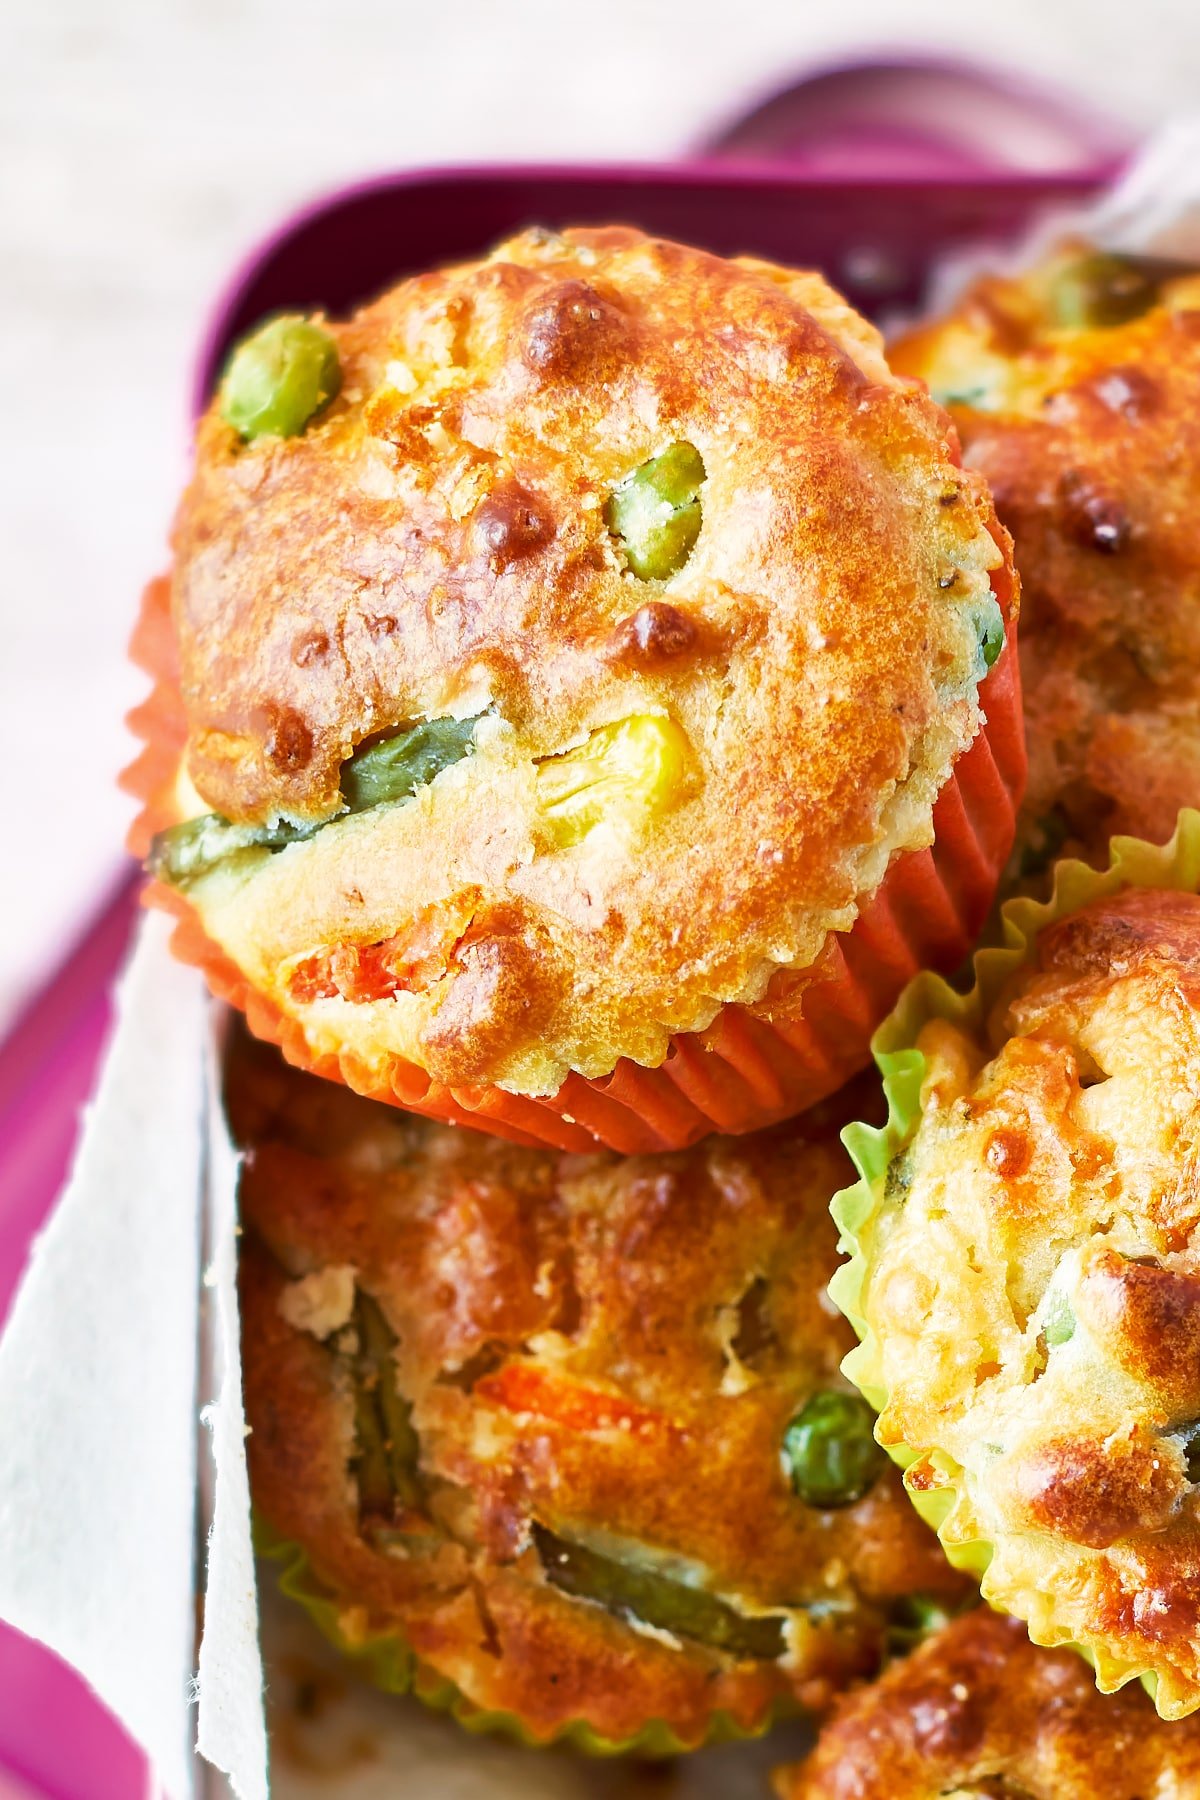 Savoury vegetable muffins in a pink lunchbox lined with paper.